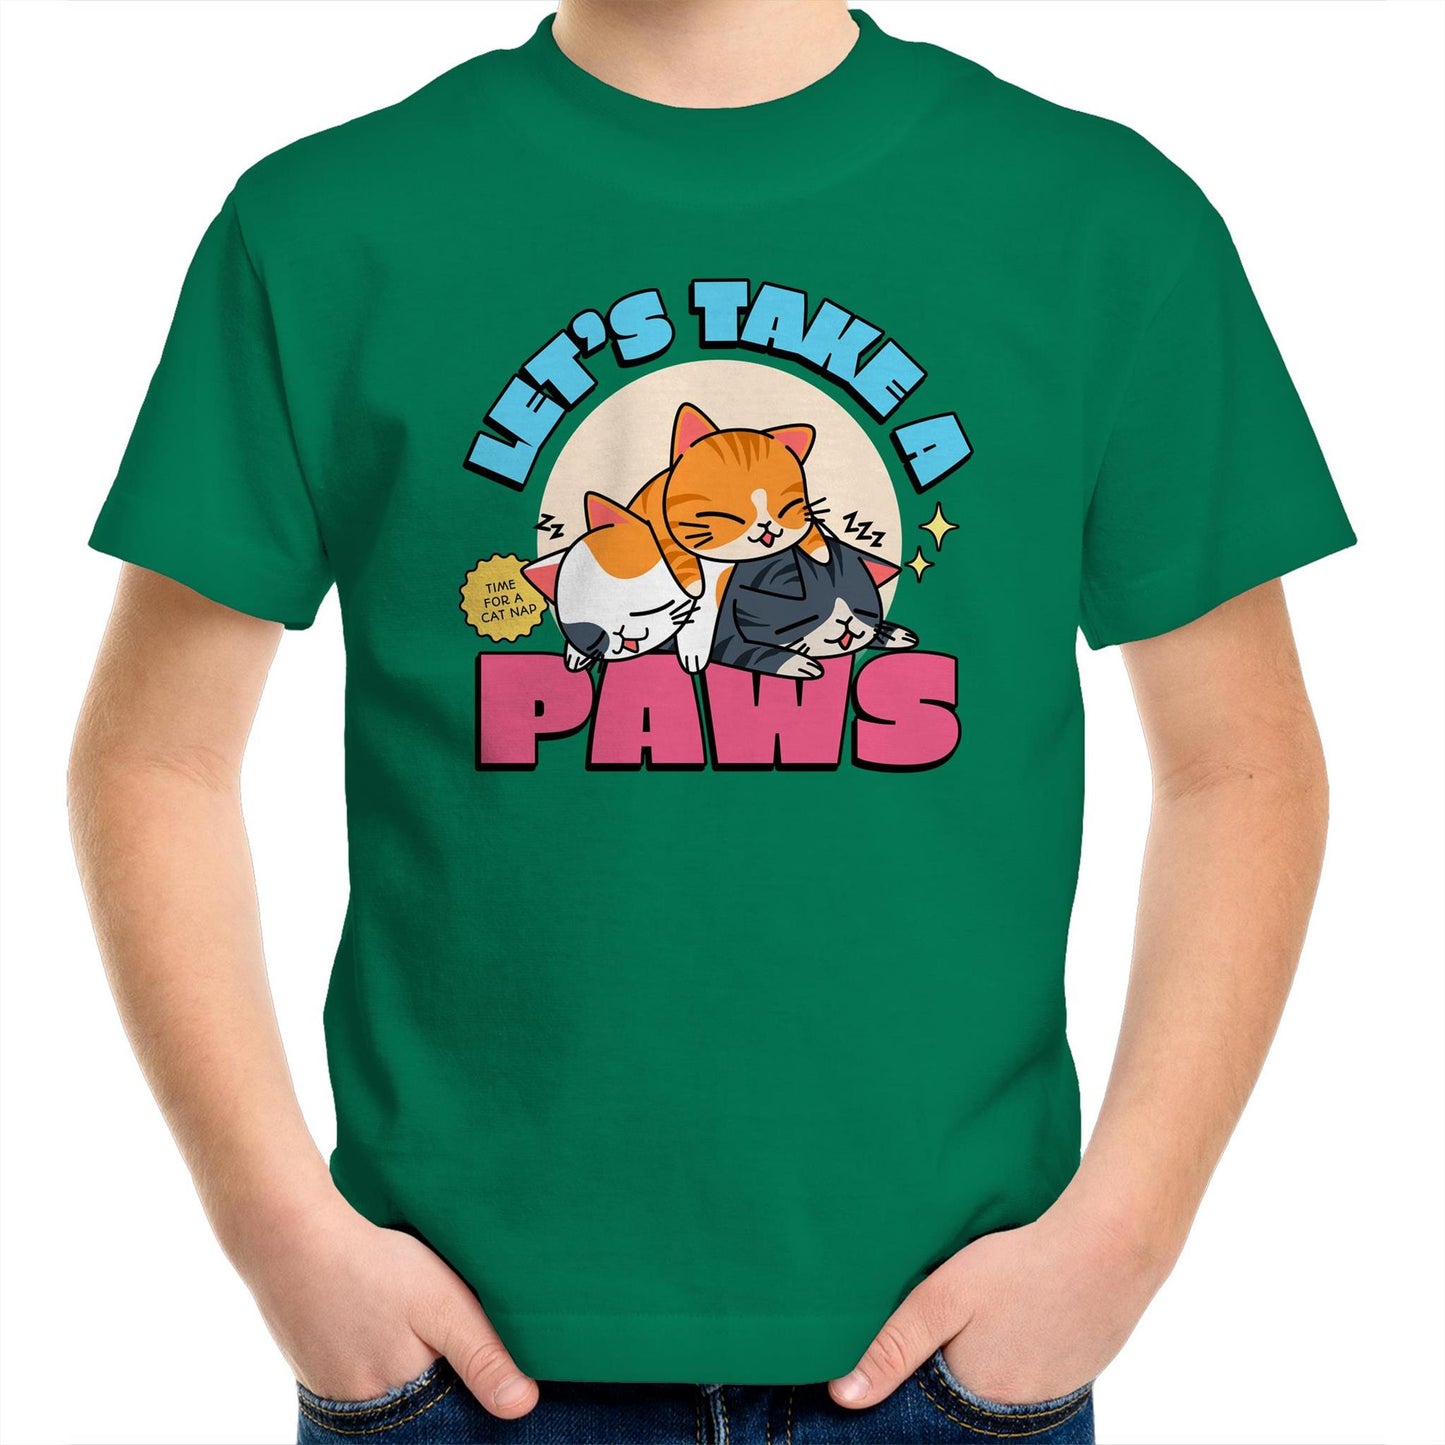 Let's Take A Pause, Time For A Cat Nap - Kids Youth T-Shirt Kelly Green Kids Youth T-shirt animal